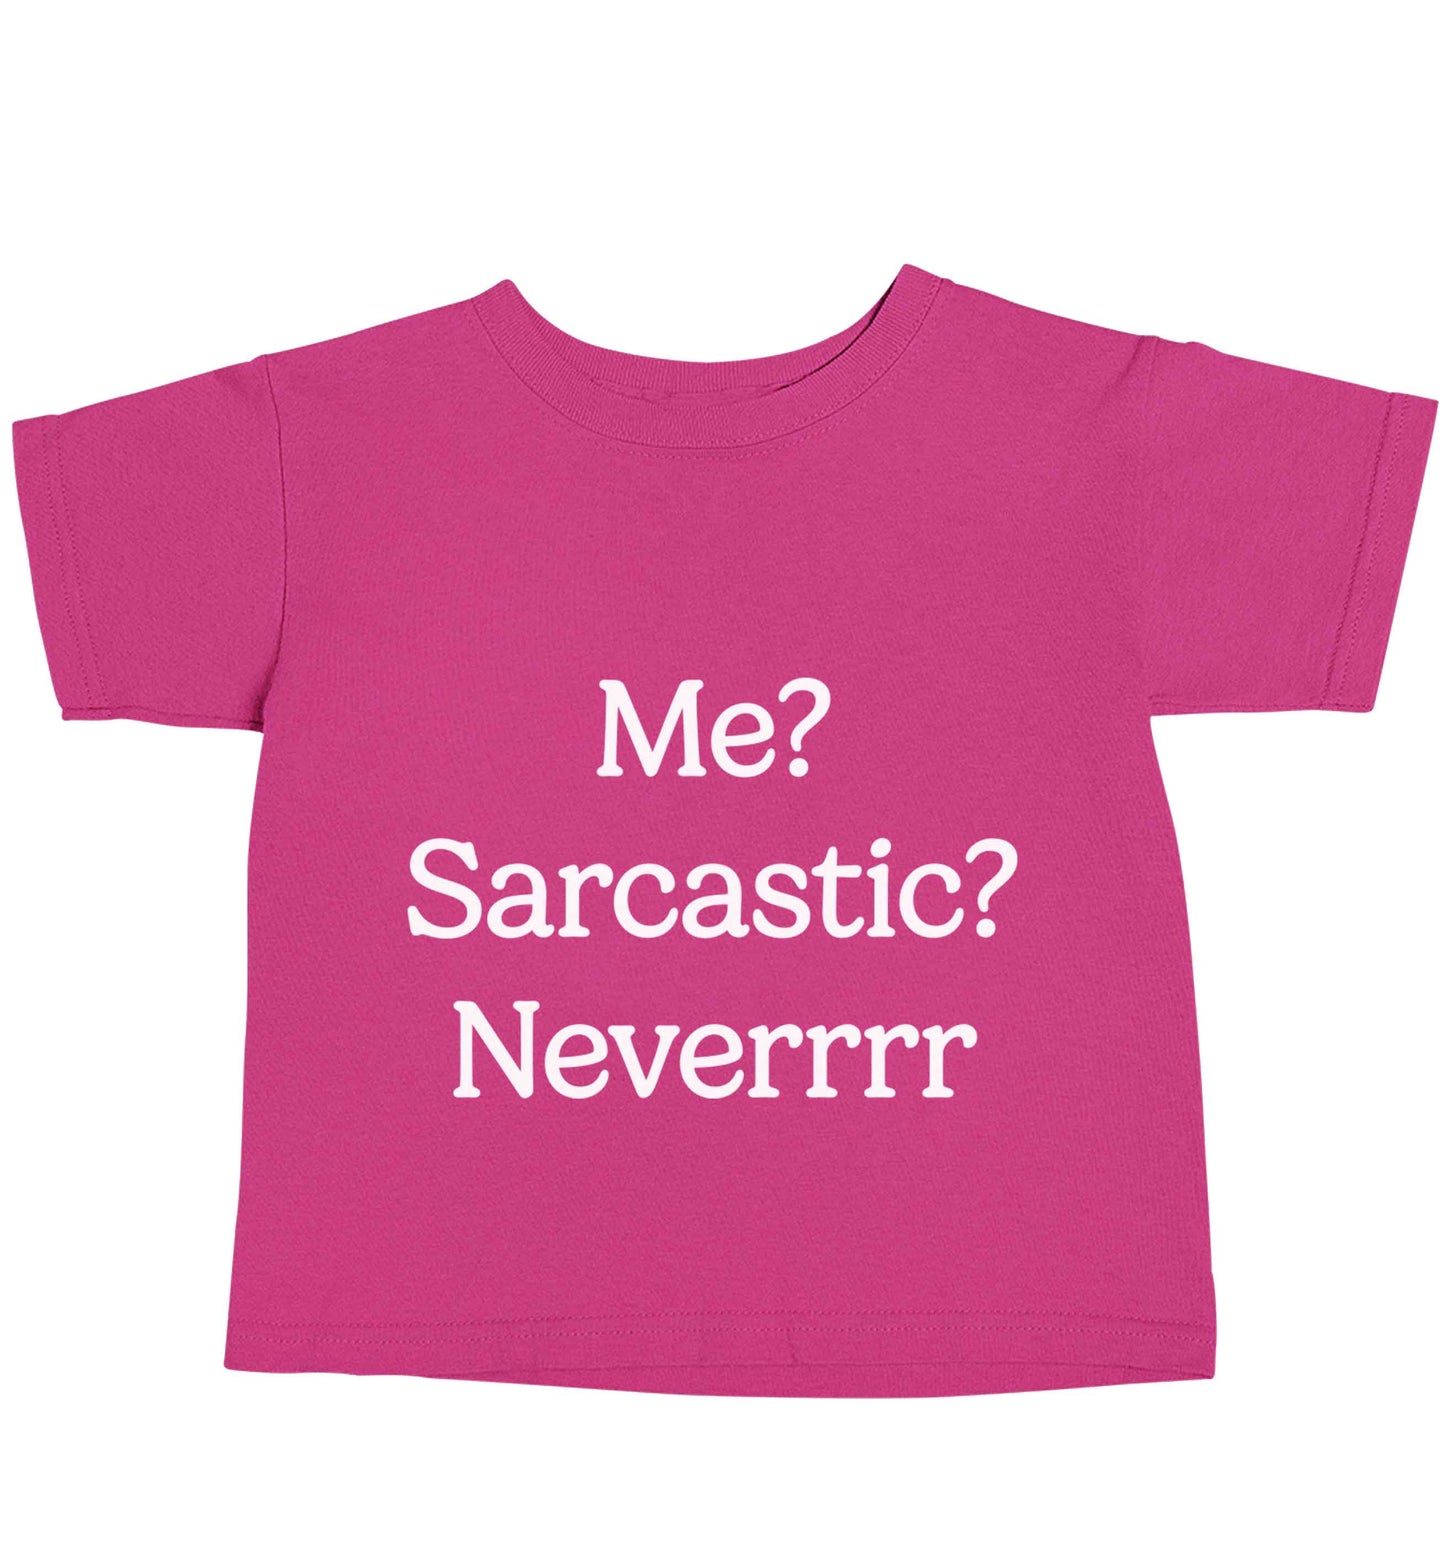 Me? sarcastic? never pink baby toddler Tshirt 2 Years